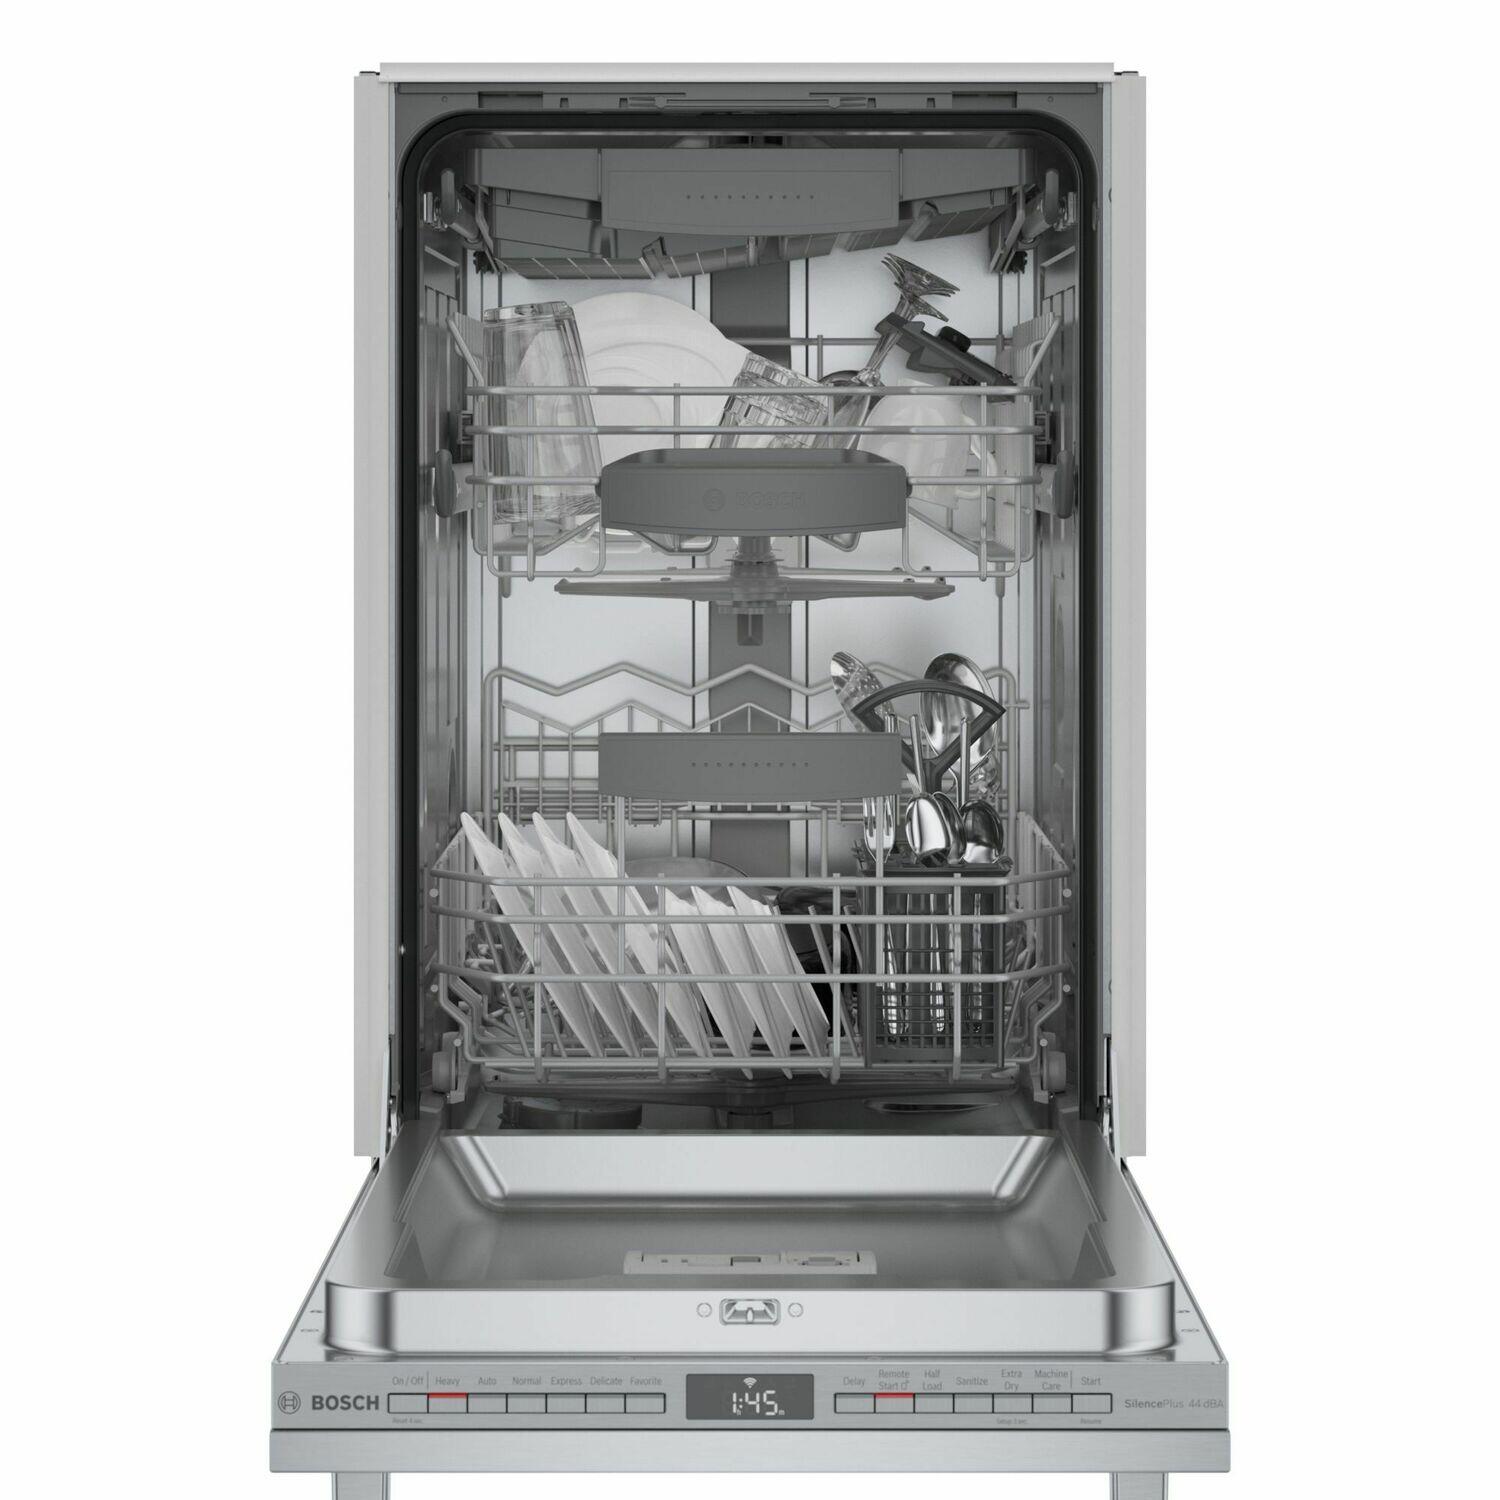 Bosch 500 Series 24 44 dBA Built-in Button Control Dishwasher & Reviews